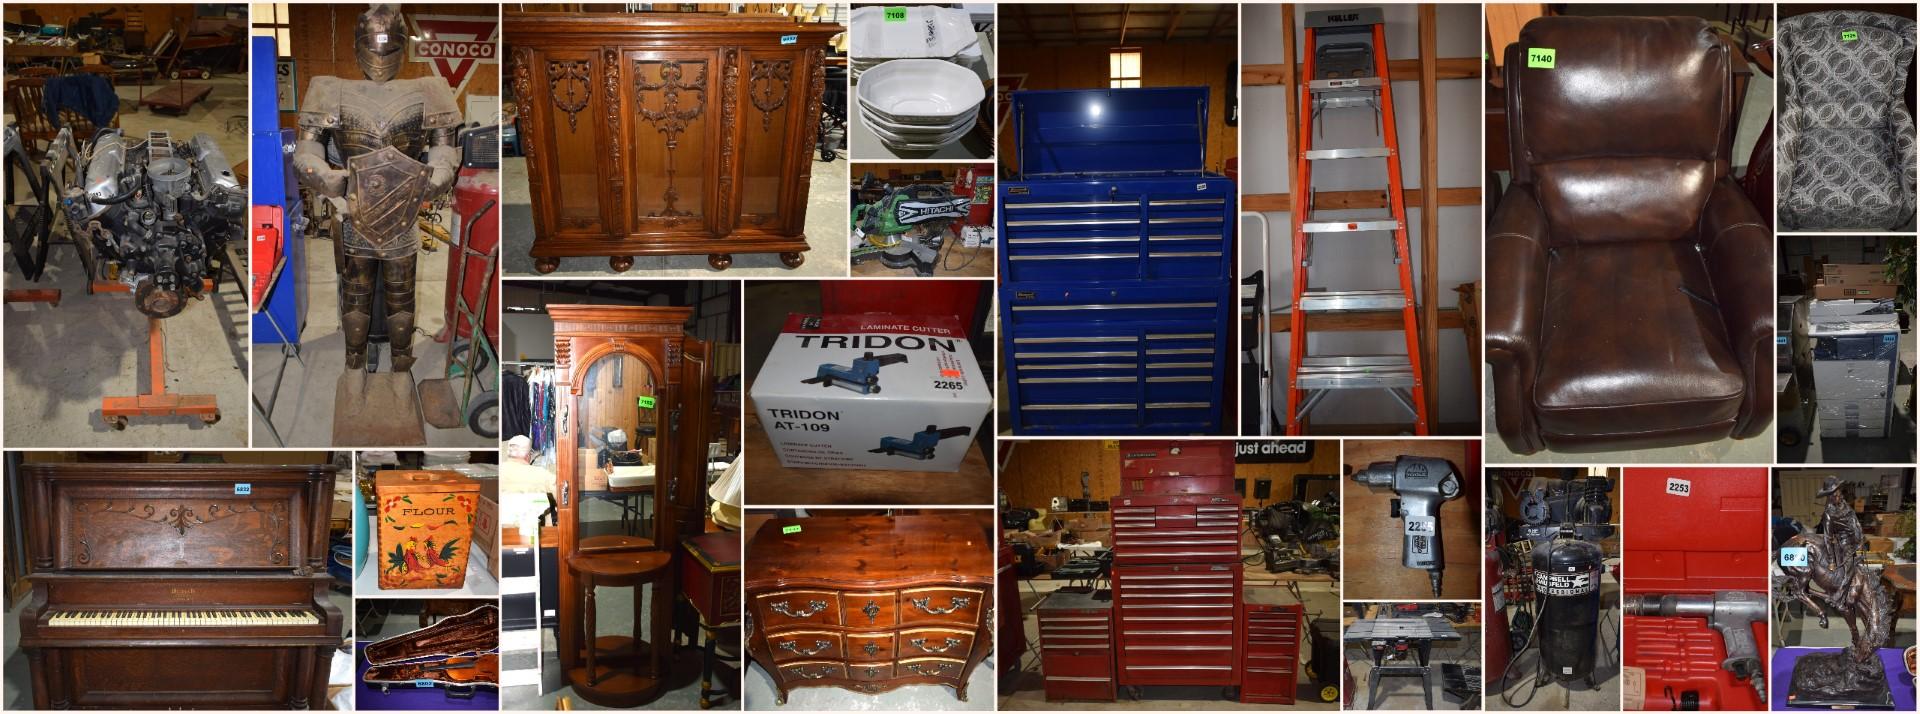 TOOLS, FURNITURE, COLLECTIBLES, DECOR, HOUSEWARES AND MORE!